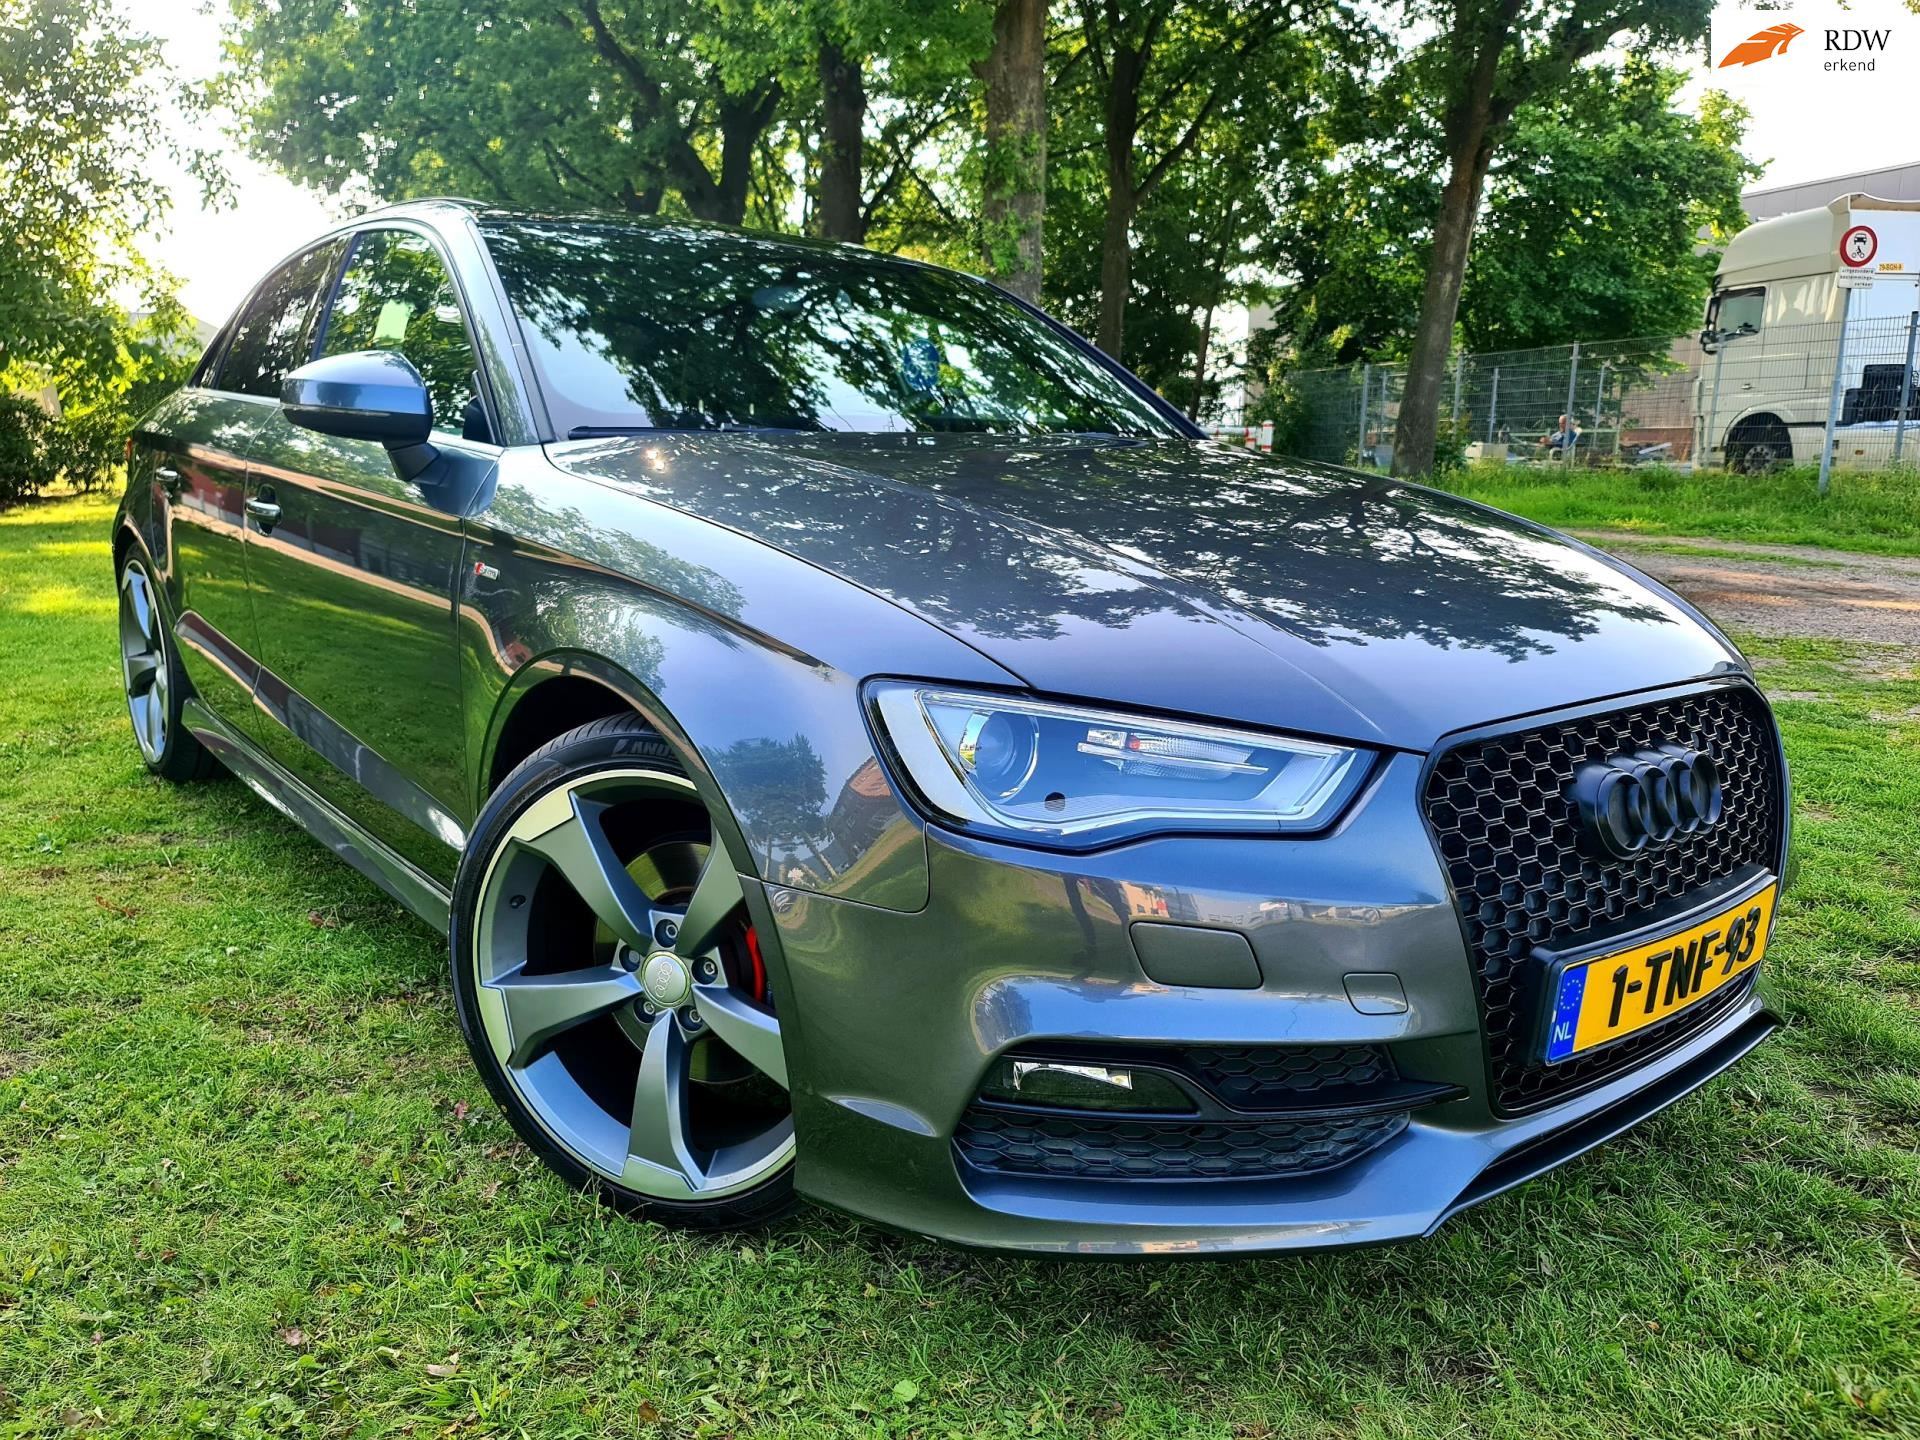 Audi A3 Limousine - 1.8 TFSI Ambition Line S S- Pano 19" Rotor uit 2014 - www.twincars.nl